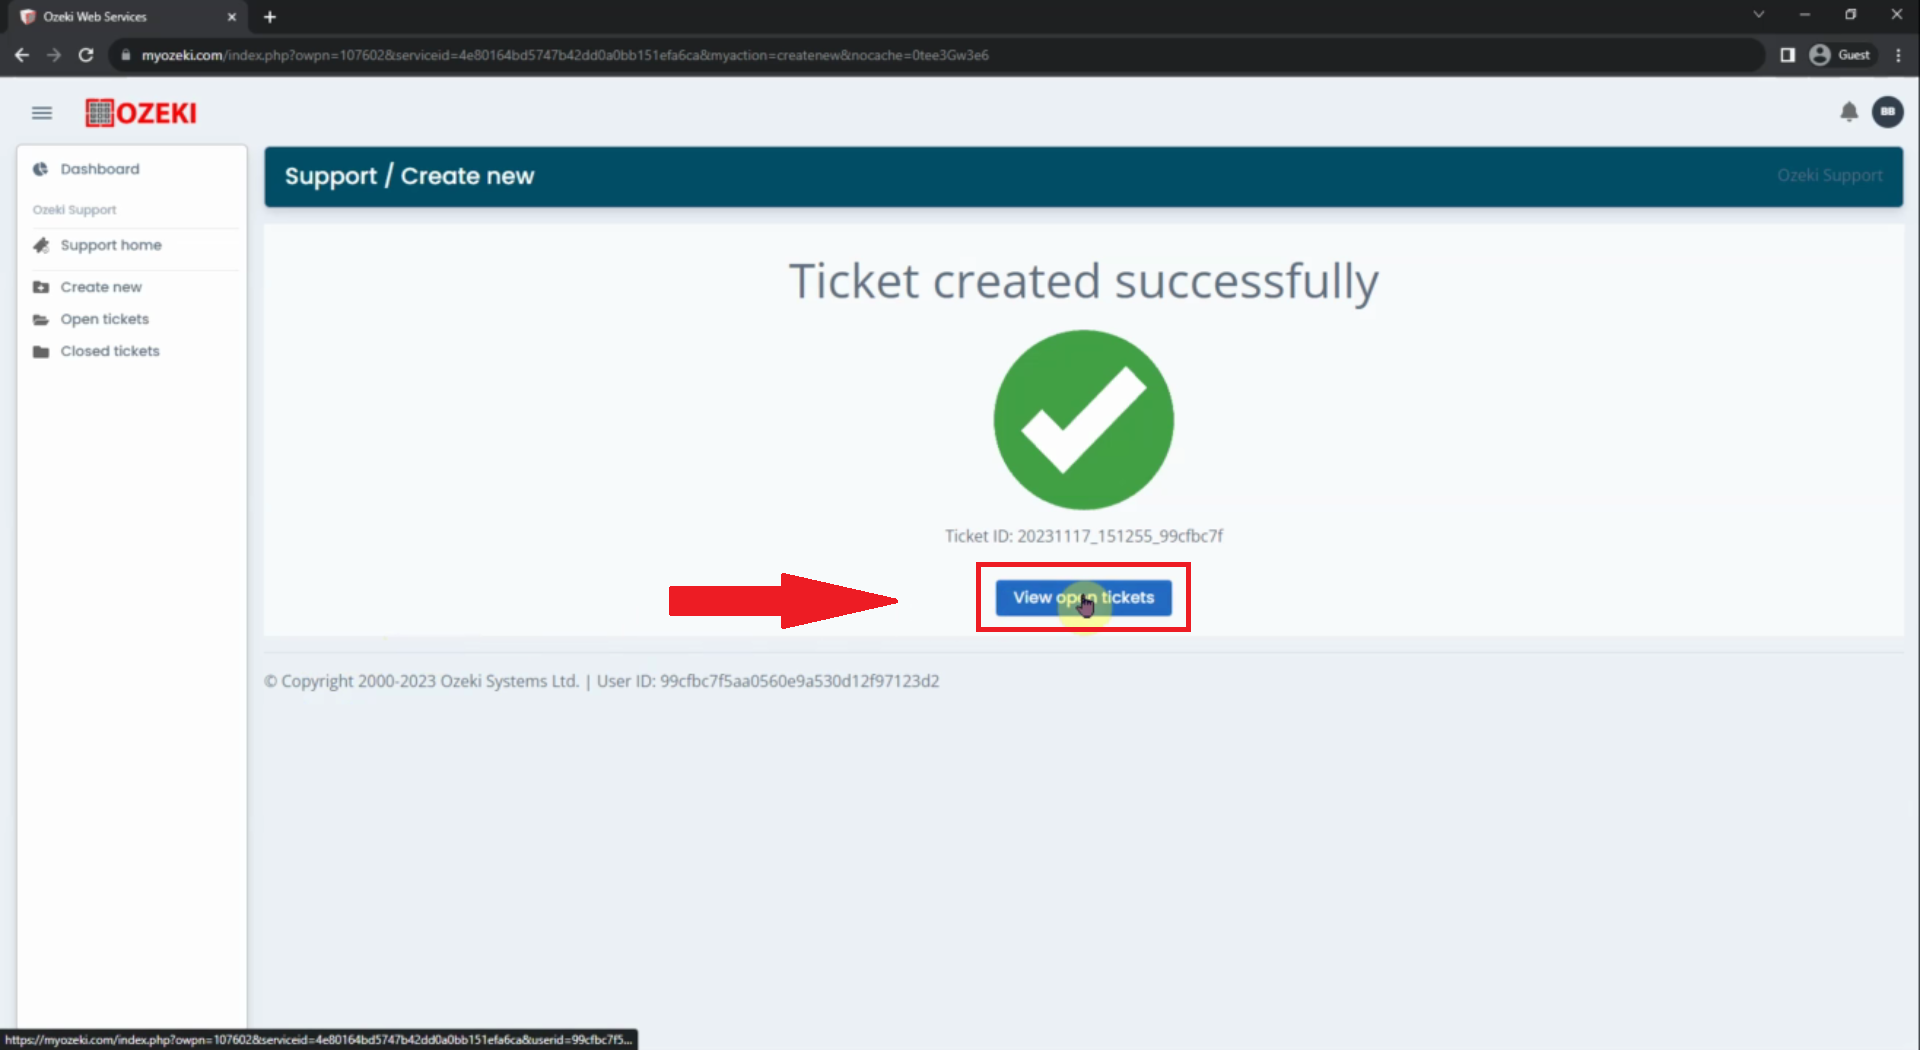 click view open tickets button